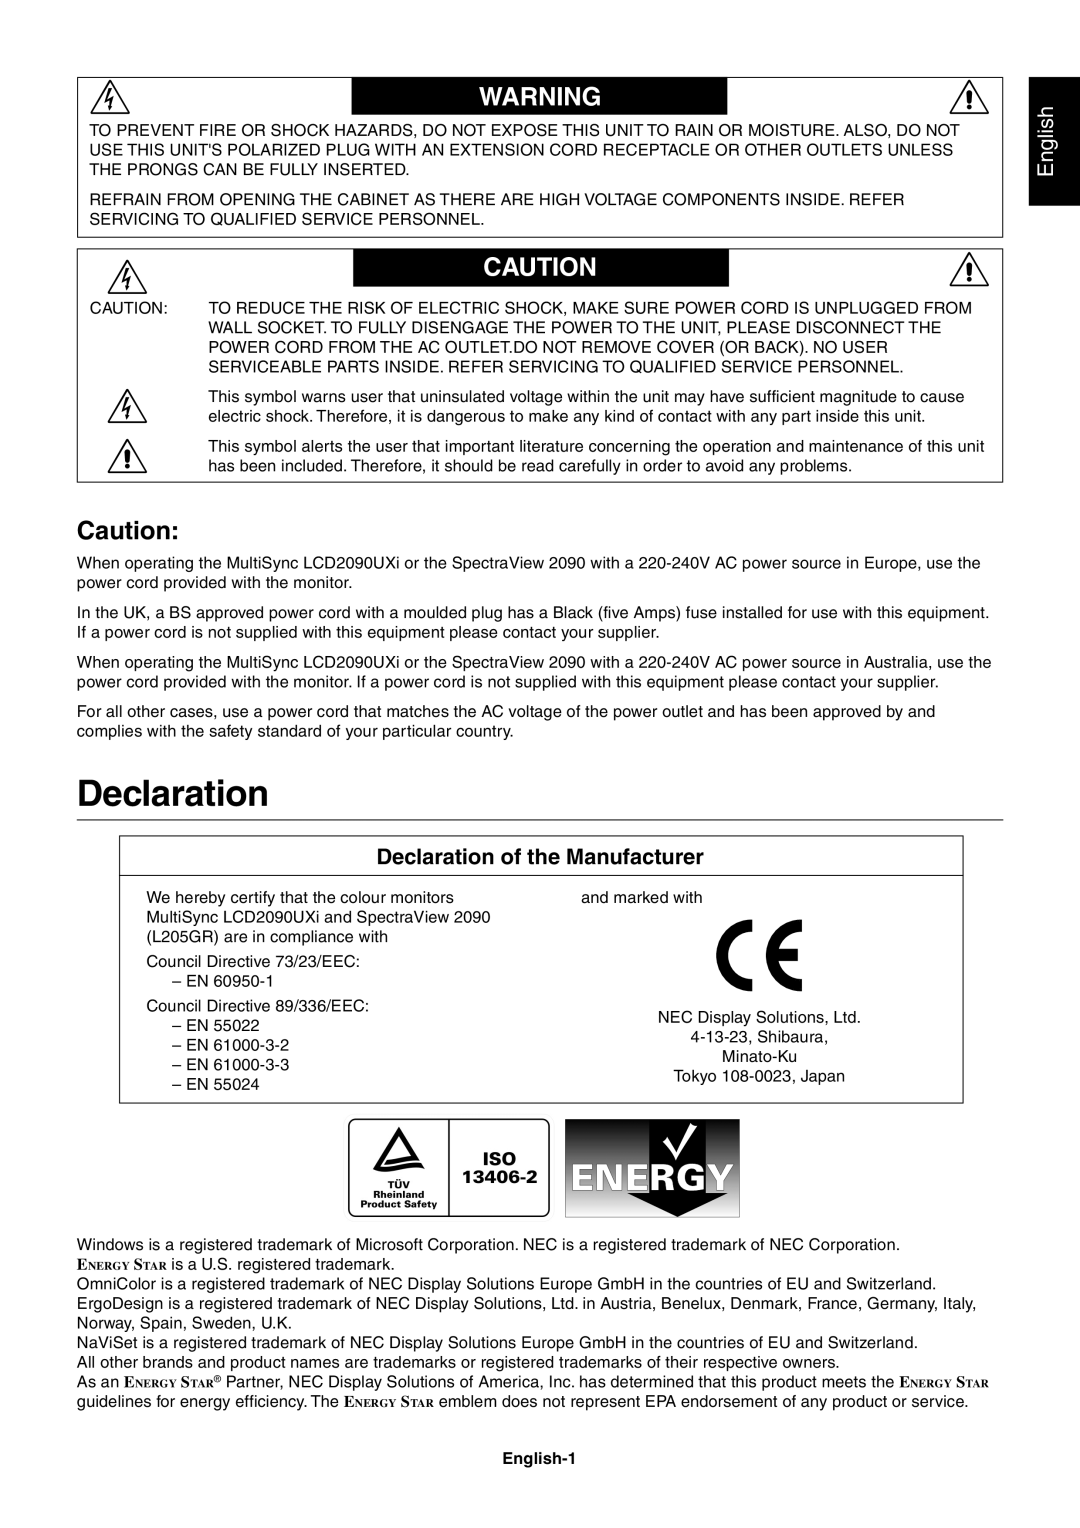 NEC LCD2090UXI user manual English, Declaration of the Manufacturer 